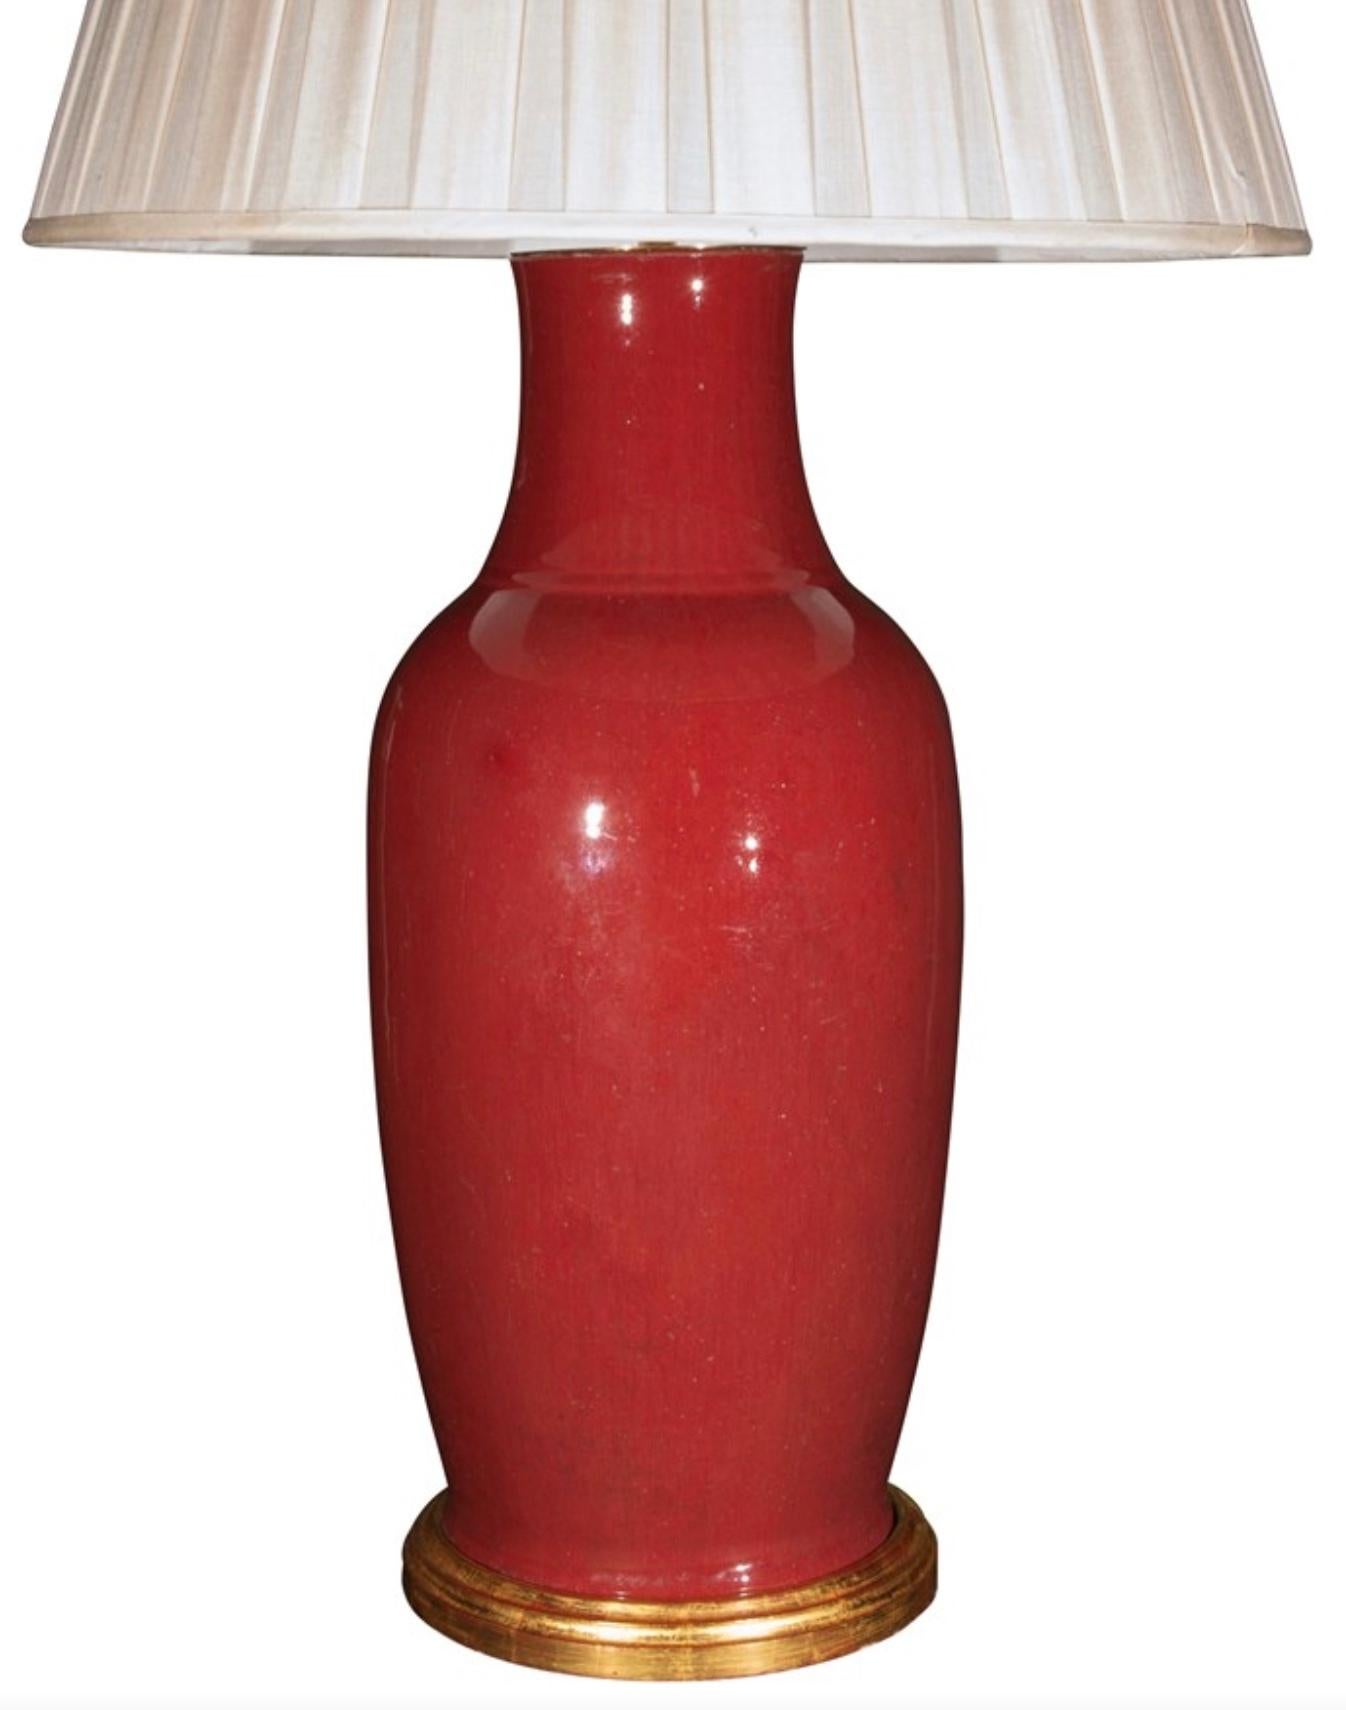 A fine Chinese sang de boeuf porcelain vase, with a wonderful deep red mottled glaze, now mounted as a lamp with a hand gilded turned base.

Height of vase: 22 in (56 cm) including giltwood base, excluding electrical fitment and lampshade.

All of